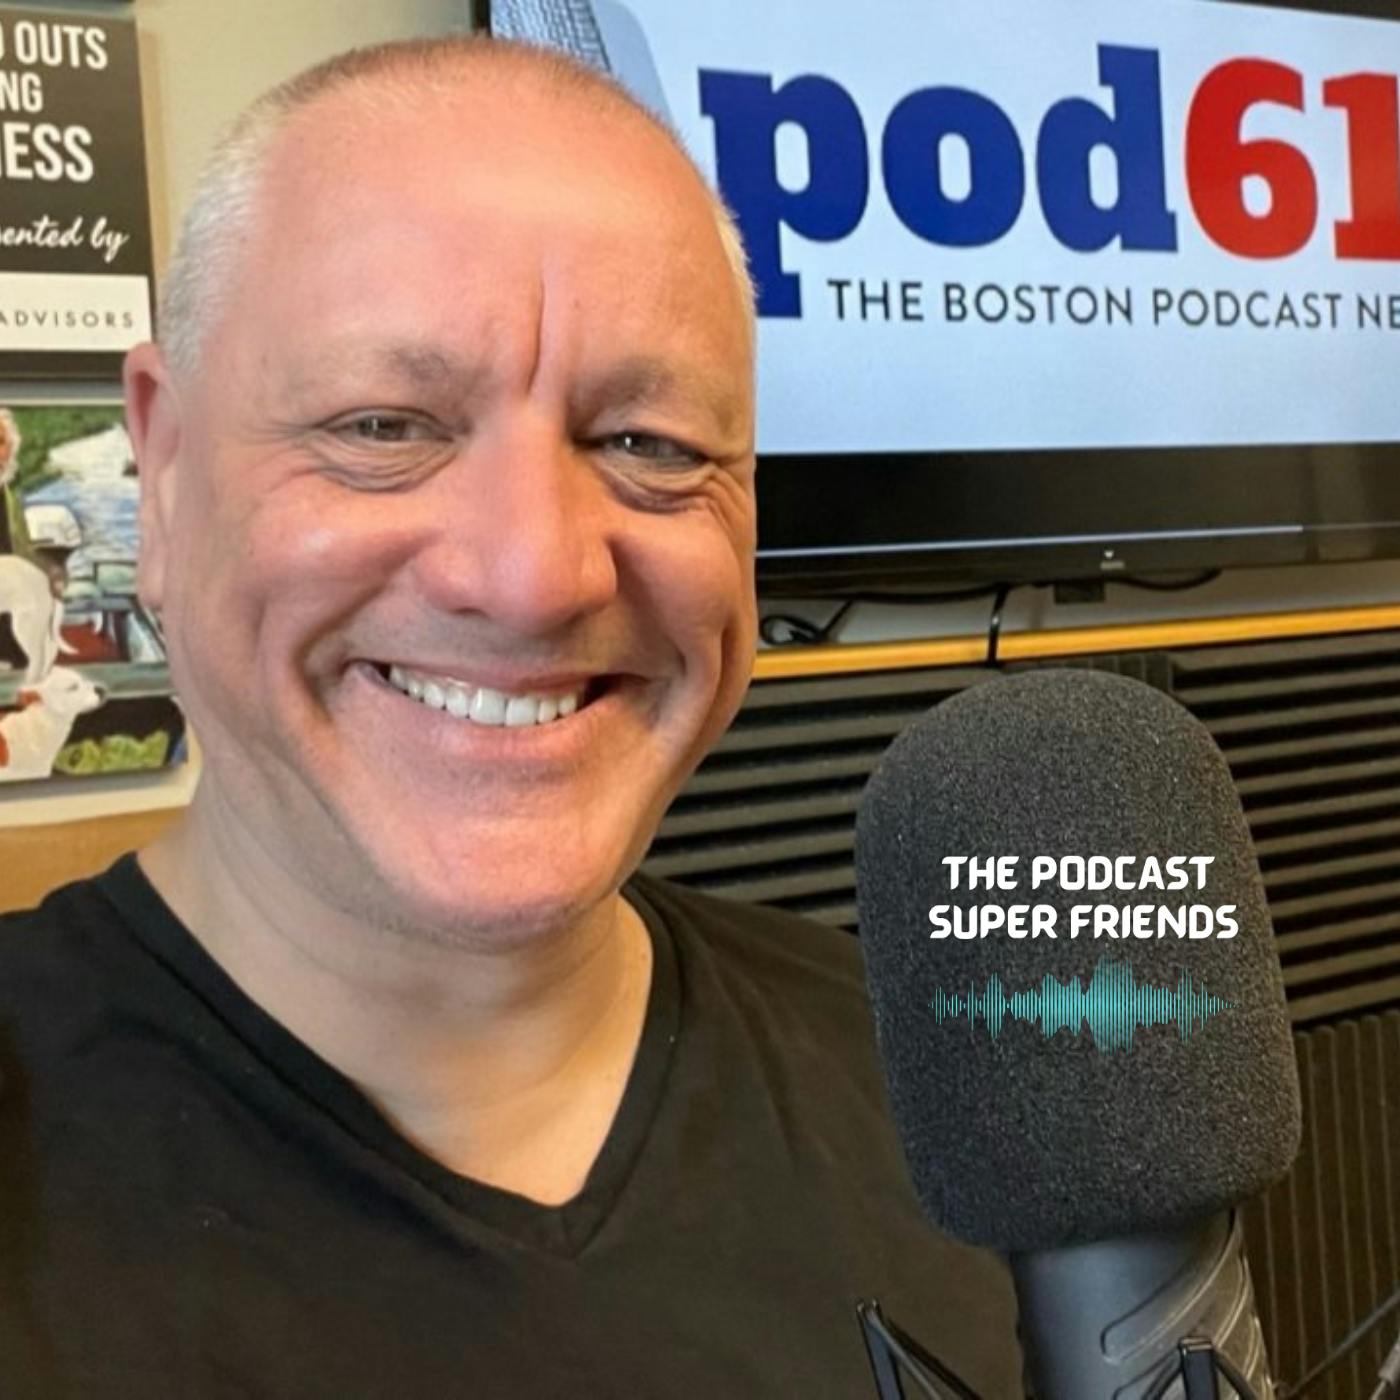 Introducing David Yas from the Boston Podcast Network